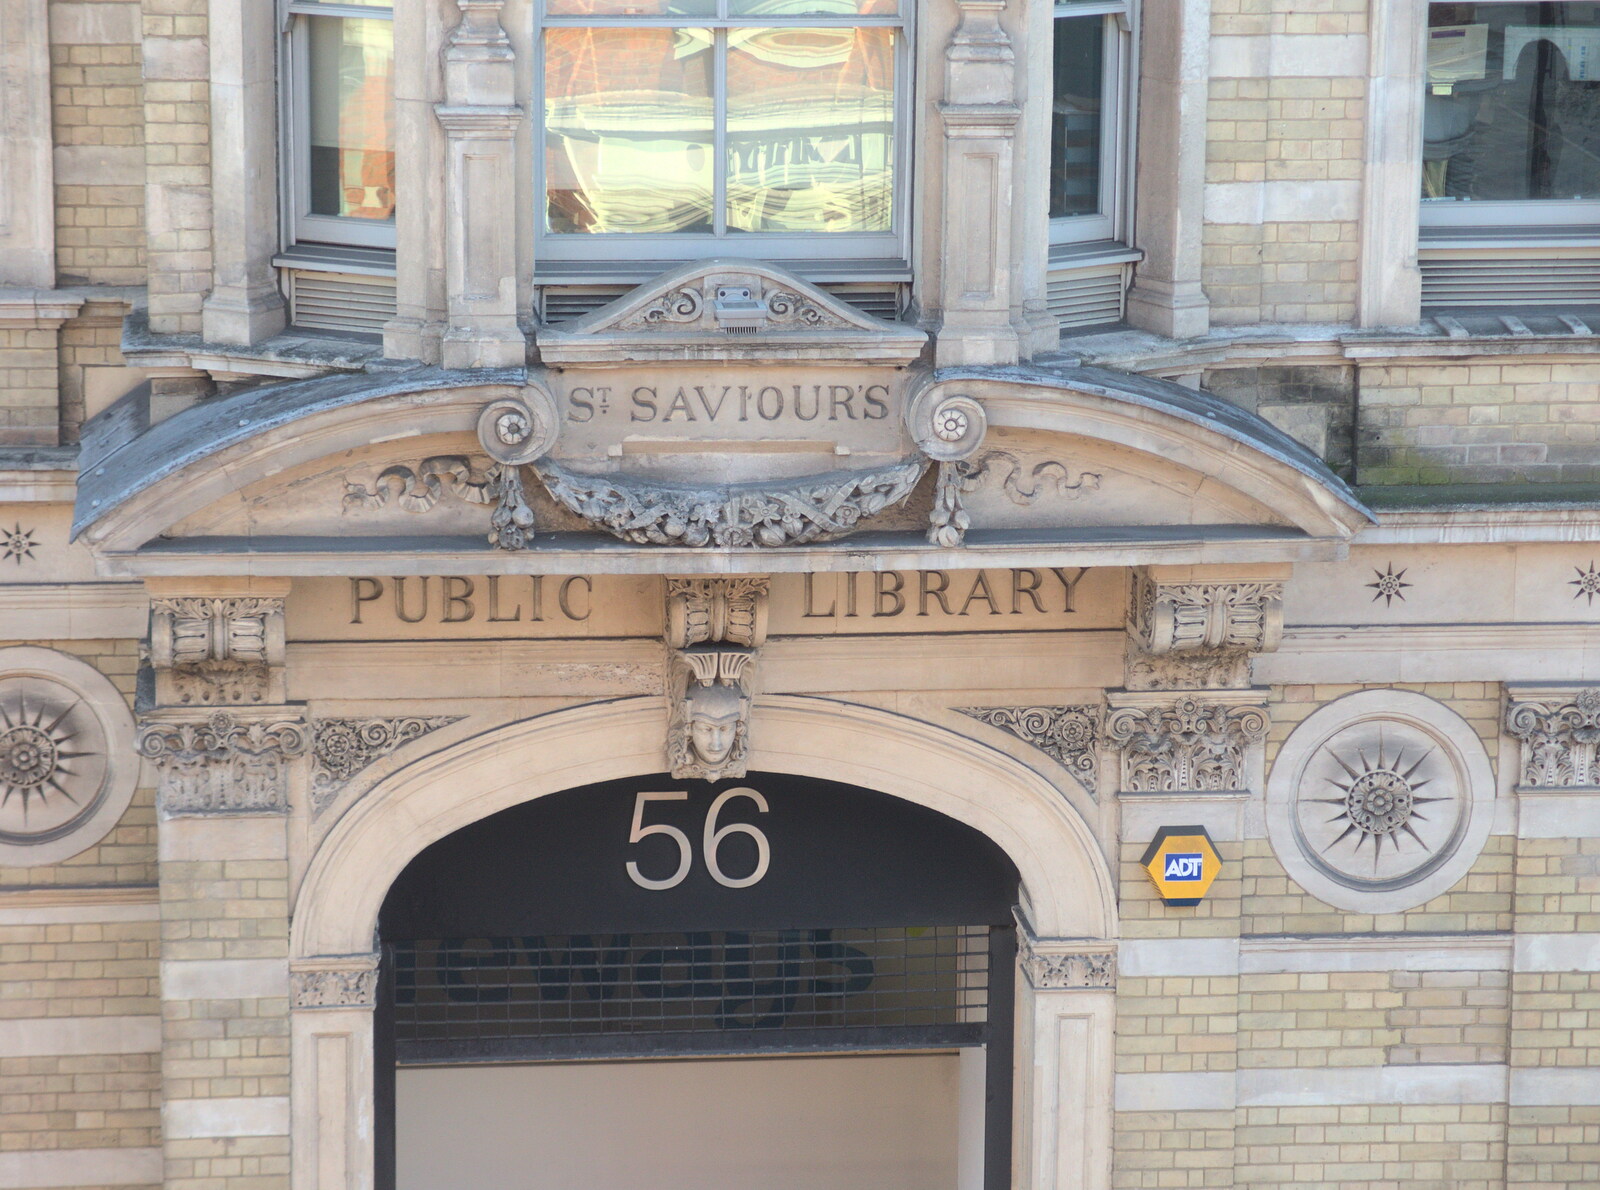 St. Saviour's Public Library sign from SwiftKey's Last Days in Southwark and a Taxi Protest, London - 18th January 2017